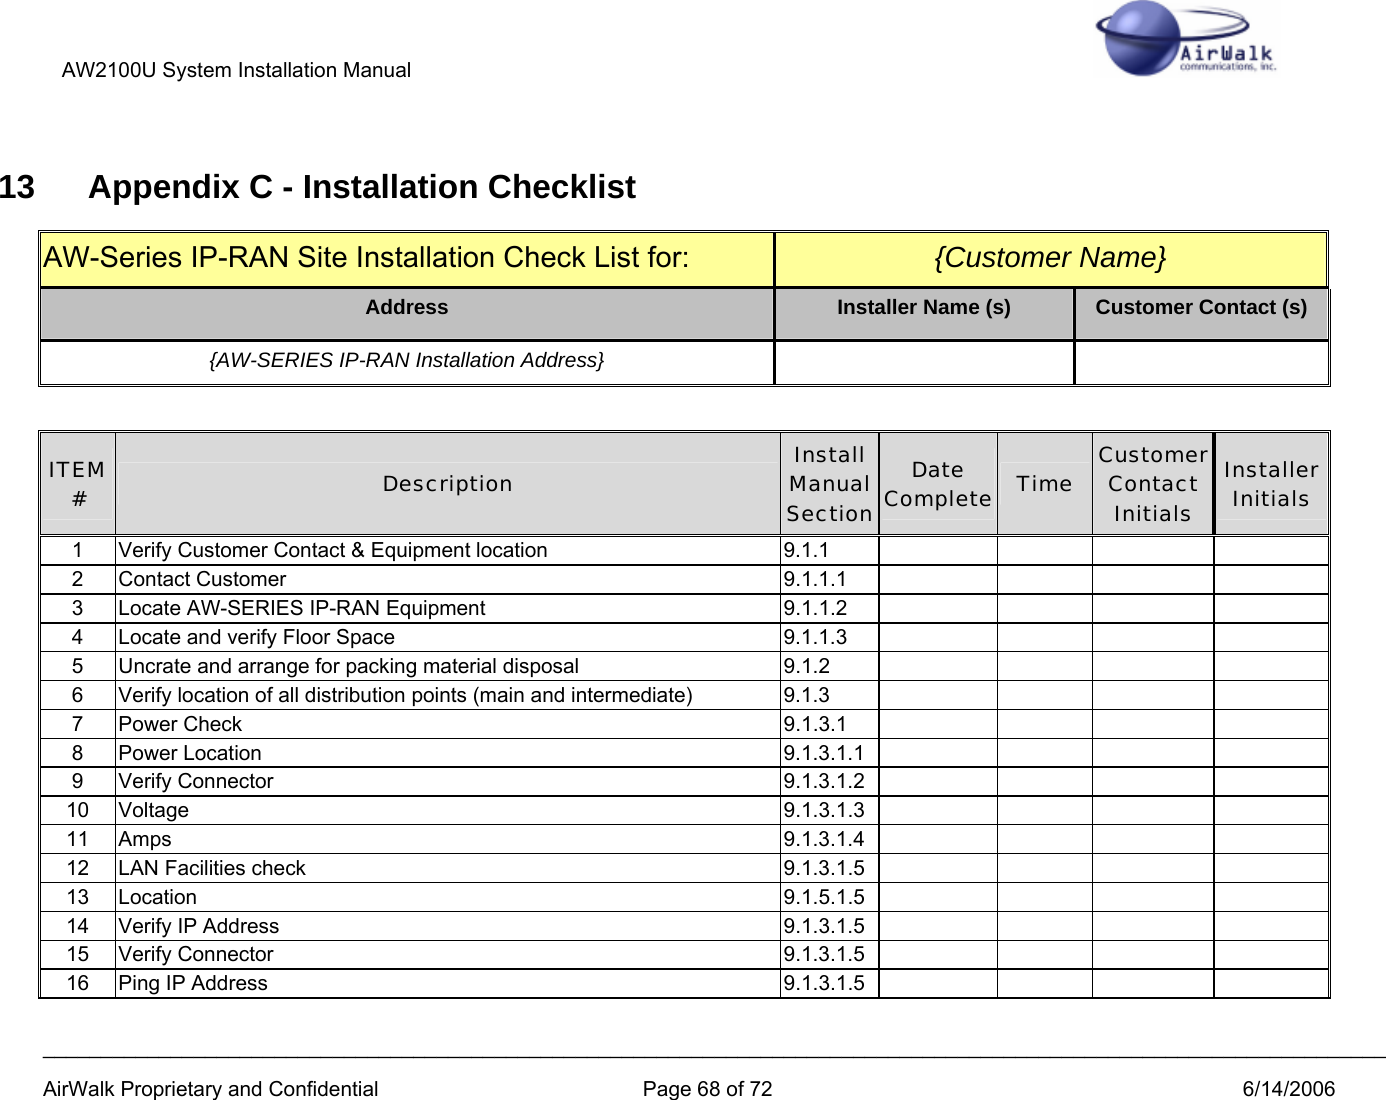 AW2100U System Installation Manual             ____________________________________________________________________________________________________________________ AirWalk Proprietary and Confidential  Page 68 of 72  6/14/2006 13  Appendix C - Installation Checklist AW-Series IP-RAN Site Installation Check List for:   {Customer Name} Address  Installer Name (s)  Customer Contact (s) {AW-SERIES IP-RAN Installation Address}     ITEM #  Description  Install Manual Section Date Complete Time  Customer Contact Initials Installer Initials 1  Verify Customer Contact &amp; Equipment location  9.1.1         2 Contact Customer  9.1.1.1        3  Locate AW-SERIES IP-RAN Equipment 9.1.1.2     4  Locate and verify Floor Space  9.1.1.3         5  Uncrate and arrange for packing material disposal  9.1.2         6  Verify location of all distribution points (main and intermediate)  9.1.3         7 Power Check  9.1.3.1        8 Power Location  9.1.3.1.1        9 Verify Connector  9.1.3.1.2        10 Voltage  9.1.3.1.3        11 Amps  9.1.3.1.4        12  LAN Facilities check 9.1.3.1.5     13 Location  9.1.5.1.5        14  Verify IP Address  9.1.3.1.5         15 Verify Connector  9.1.3.1.5        16  Ping IP Address  9.1.3.1.5         